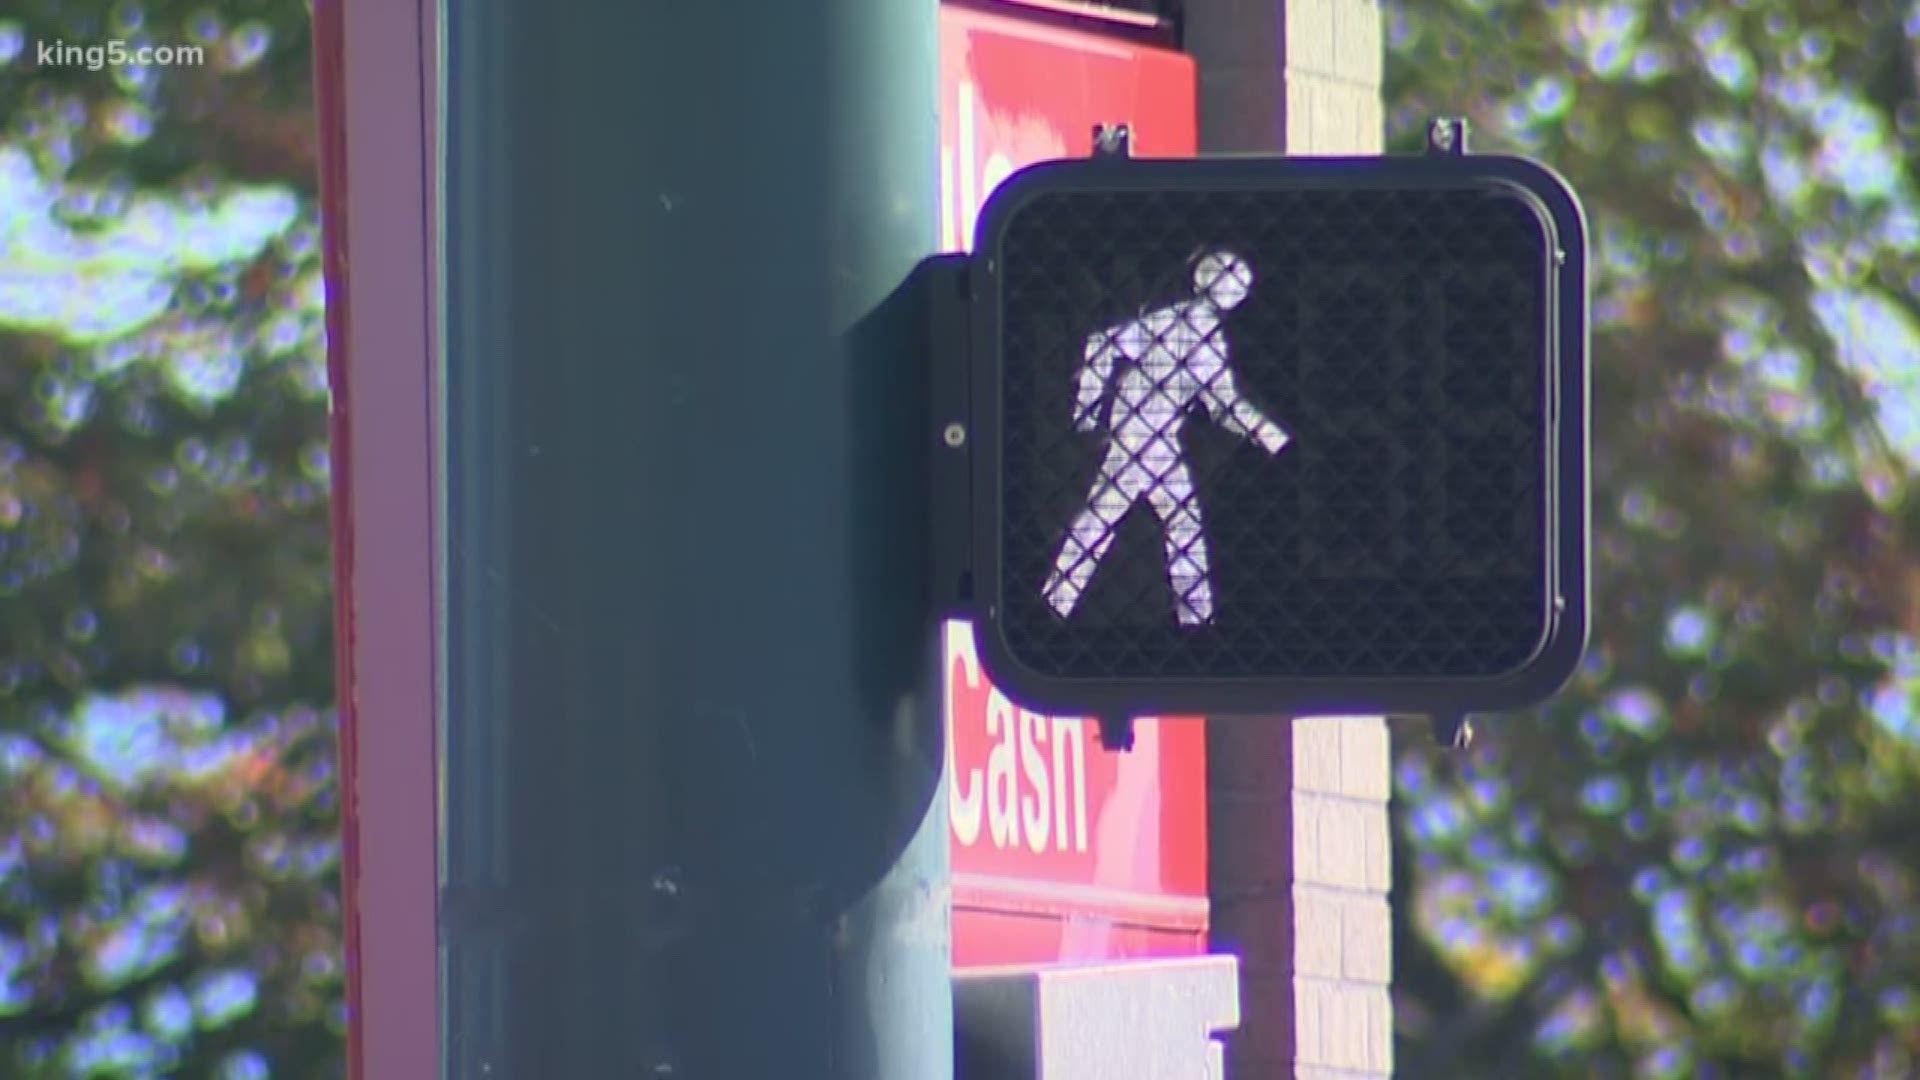 Police are evaluating some accident-prone hot spots throughout the city to ensure drivers and pedestrians are following the law.